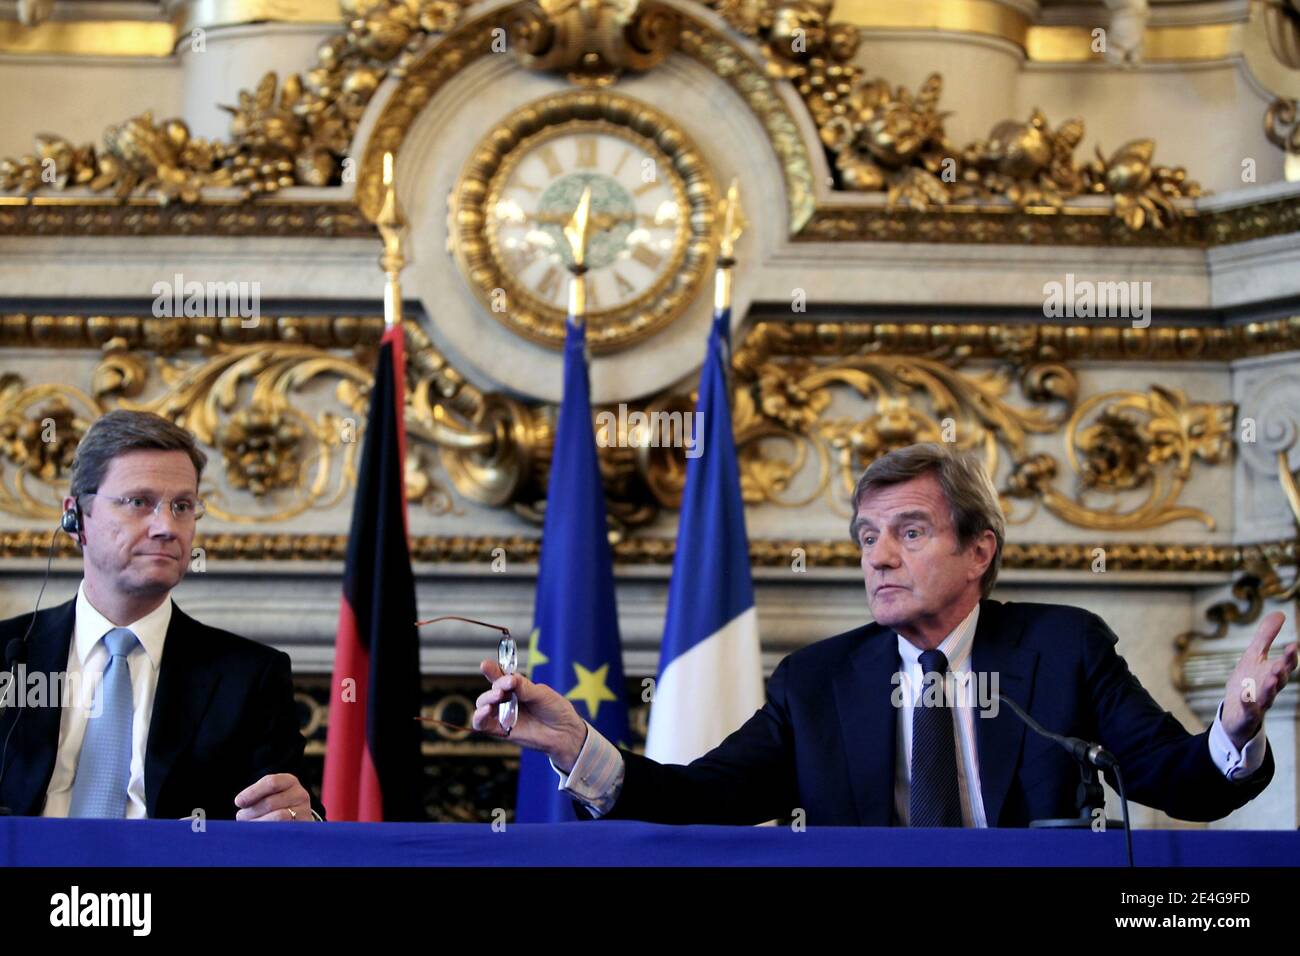 French Foreign Minister Bernard Kouchner holds a press conference with German Vice Chancellor and Foreign Minister Guido Westerwelle about European affairs, the situation in Middle East of Afganistan and in Iran at Quai d Orsay, Paris, France on November 2nd, 2009. Photo by Stephane Lemouton/ABACAPRESS.COM Stock Photo